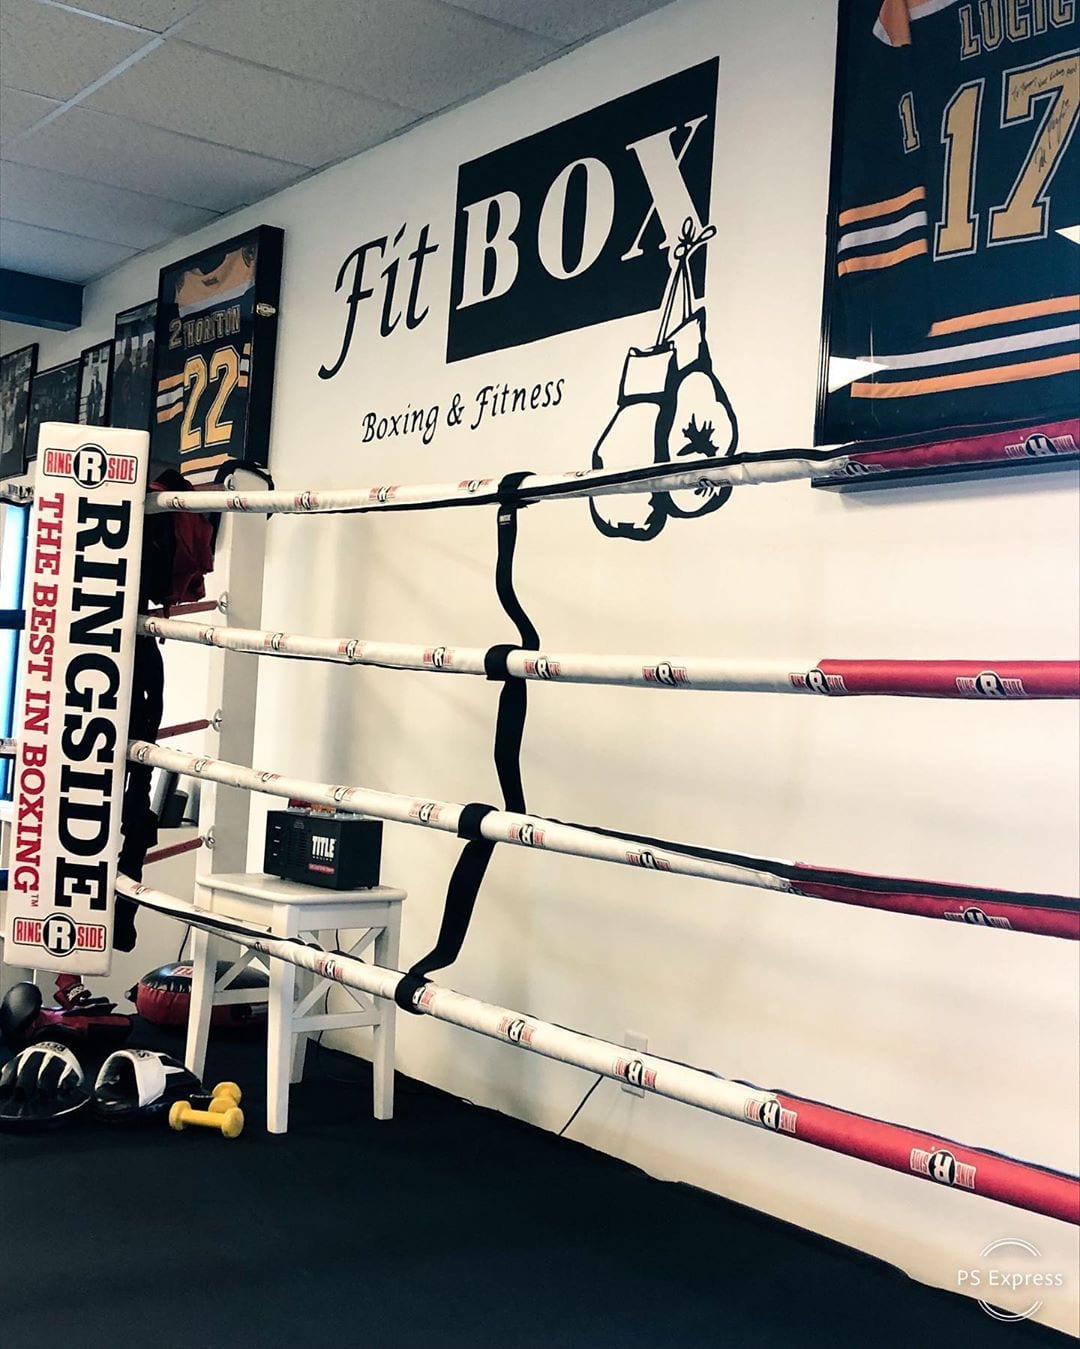 #Boxing . Sign up for a Free boxing workout Today at (781)727-9503 or email fitbox@outlook.com #GetinShape #Boston #Dedham